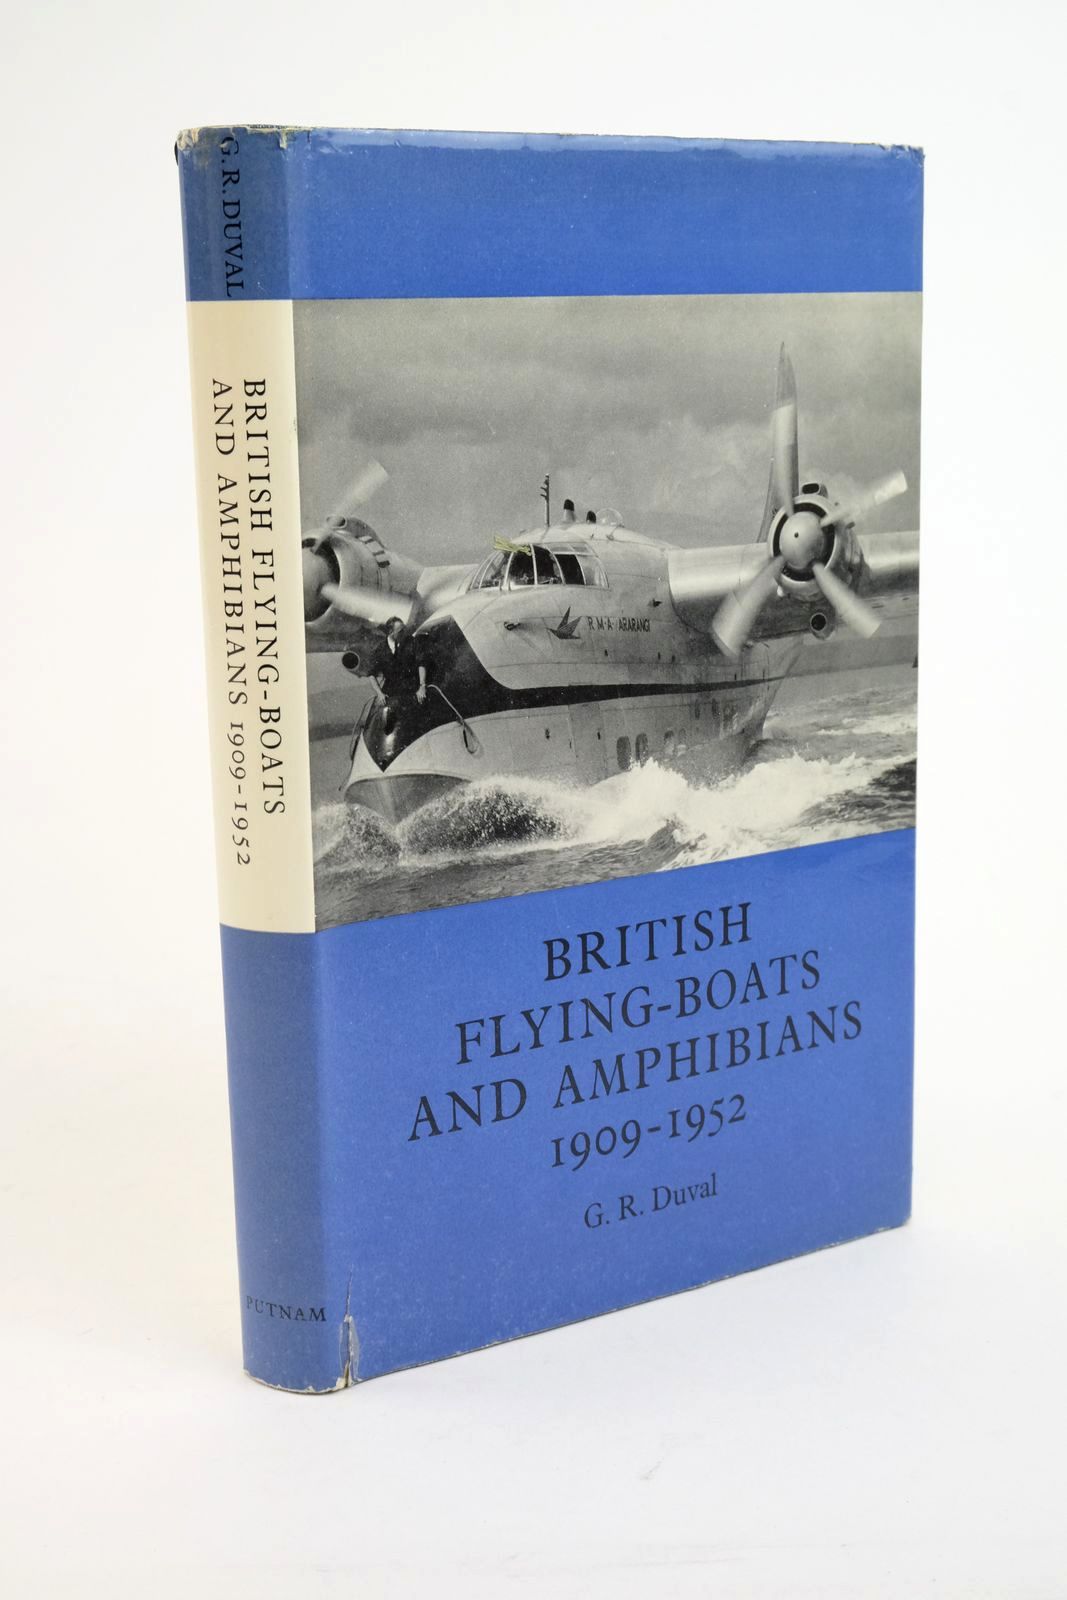 Photo of BRITISH FLYING-BOATS AND AMPHIBIANS 1909-1952 written by Duval, G.R. published by Putnam, Aero Publishers (STOCK CODE: 1322024)  for sale by Stella & Rose's Books